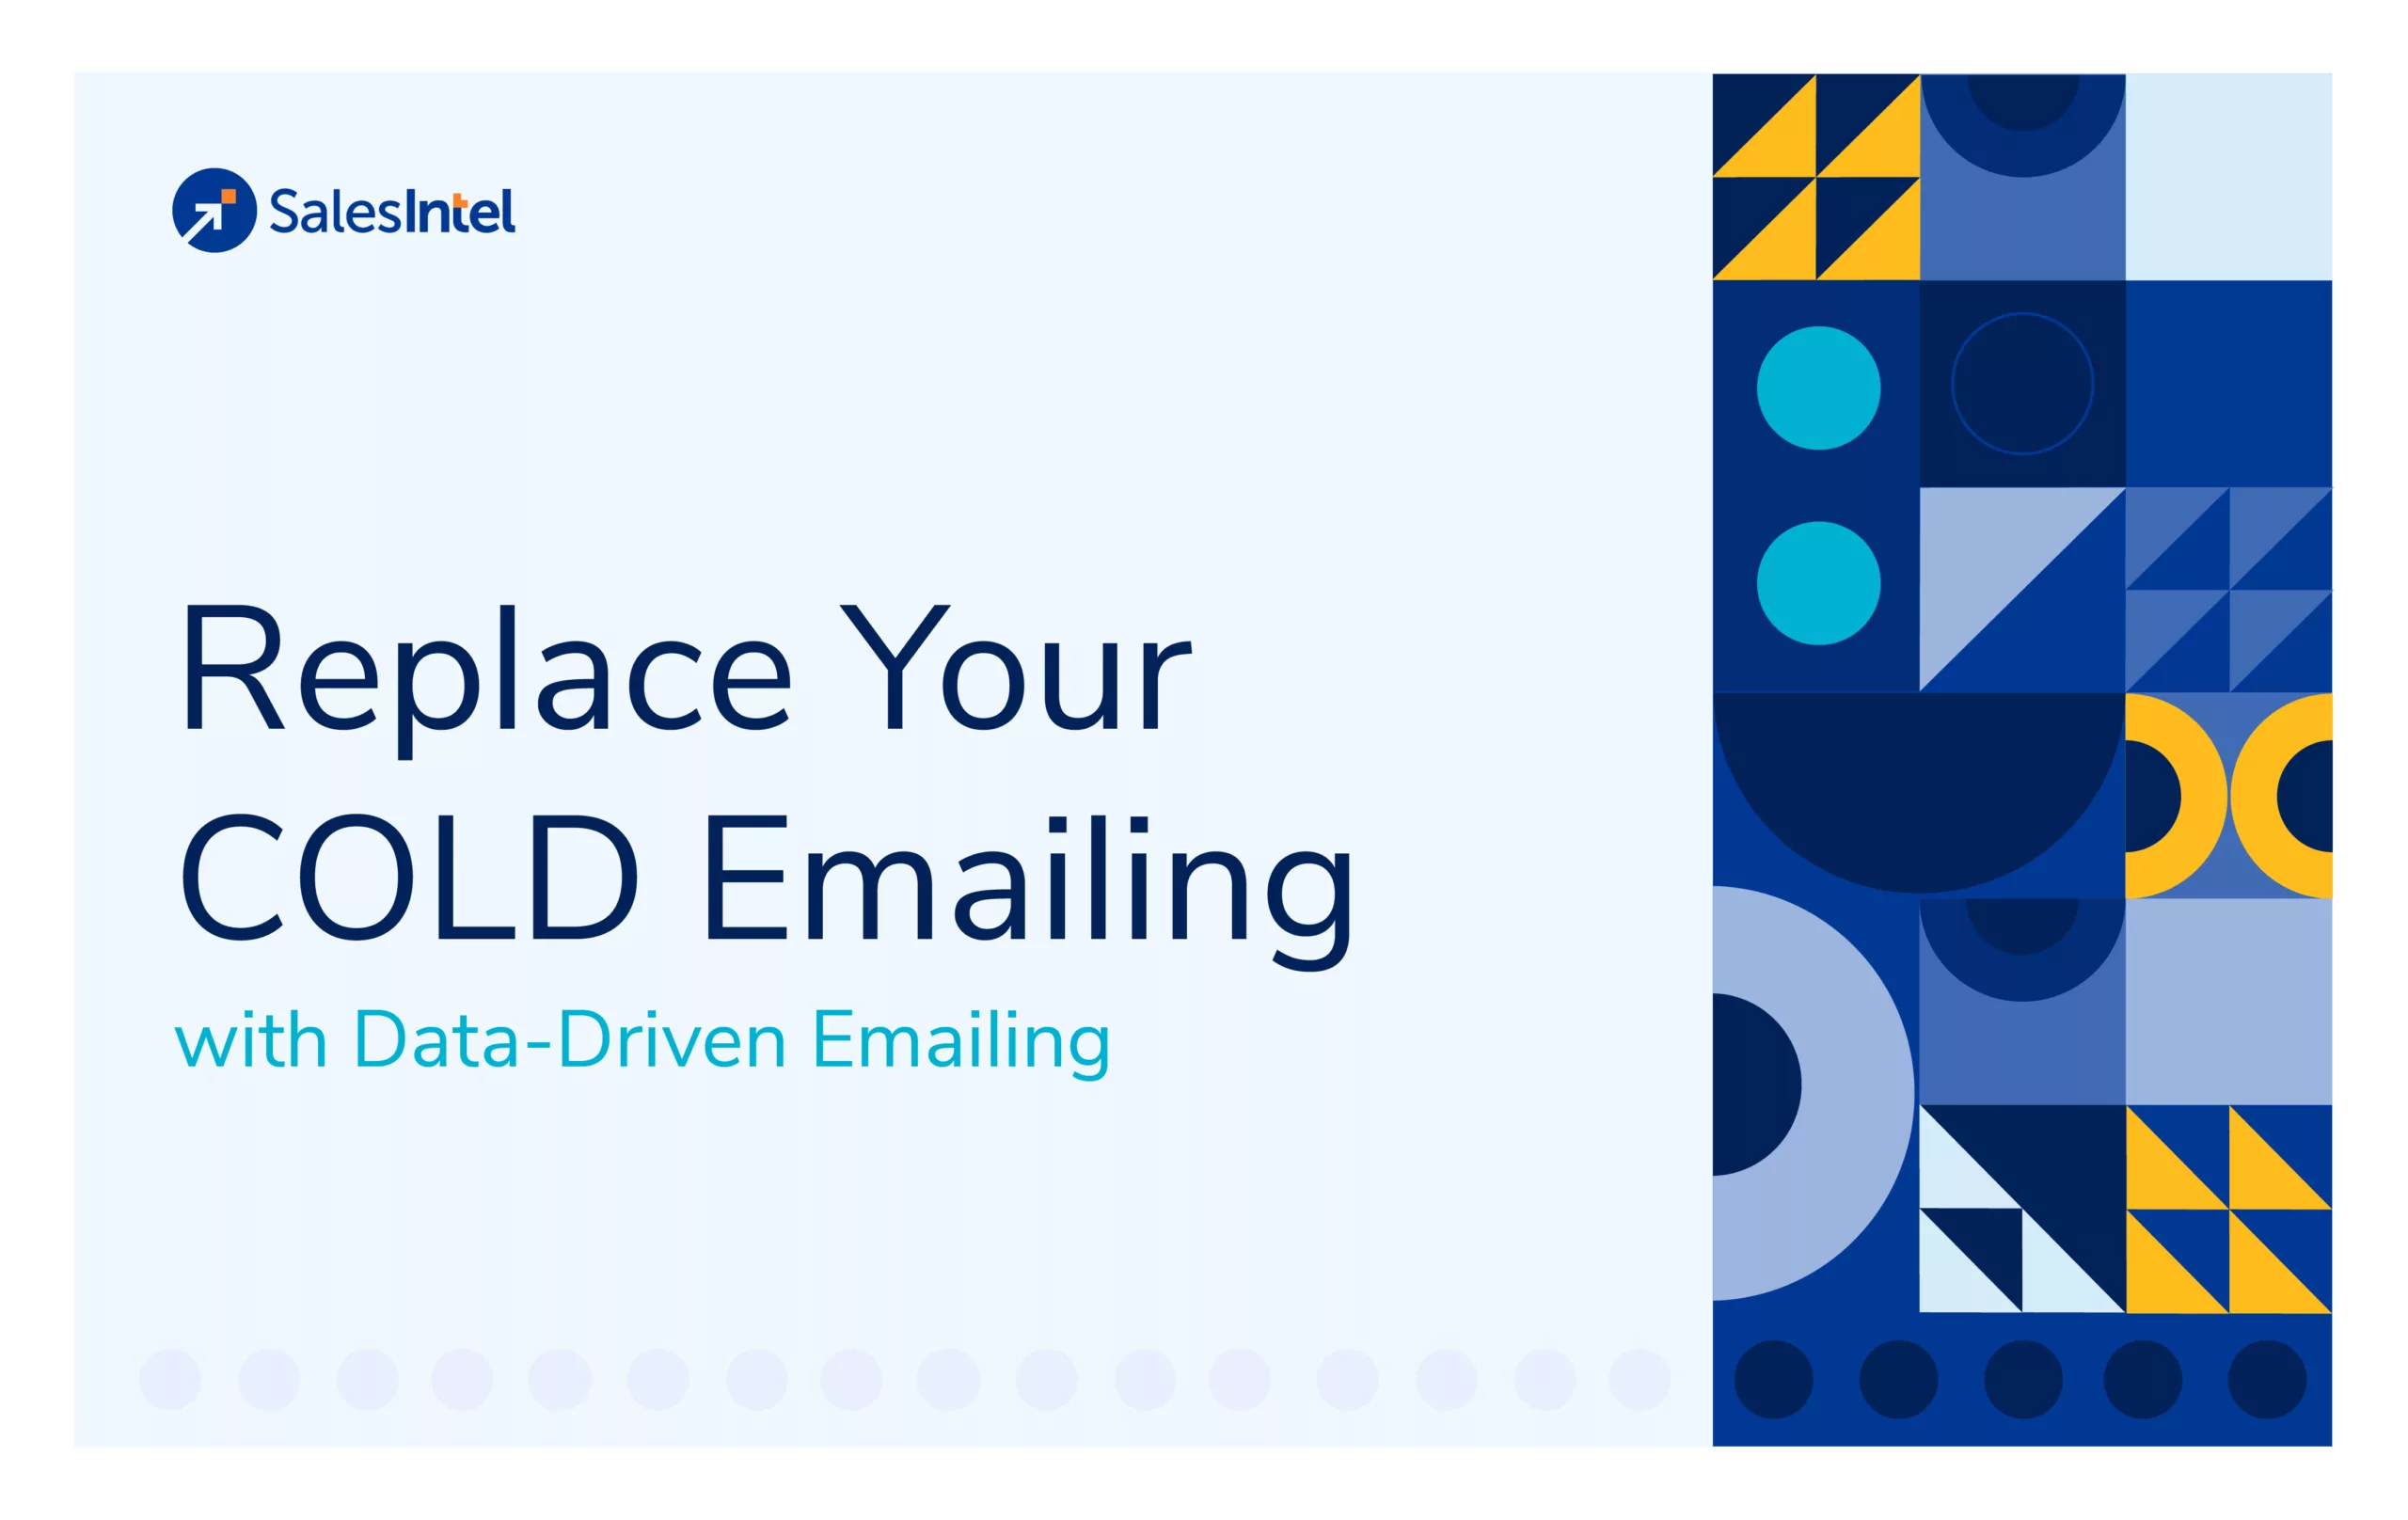 Replace Your COLD Emailing with Data-Driven Emailing